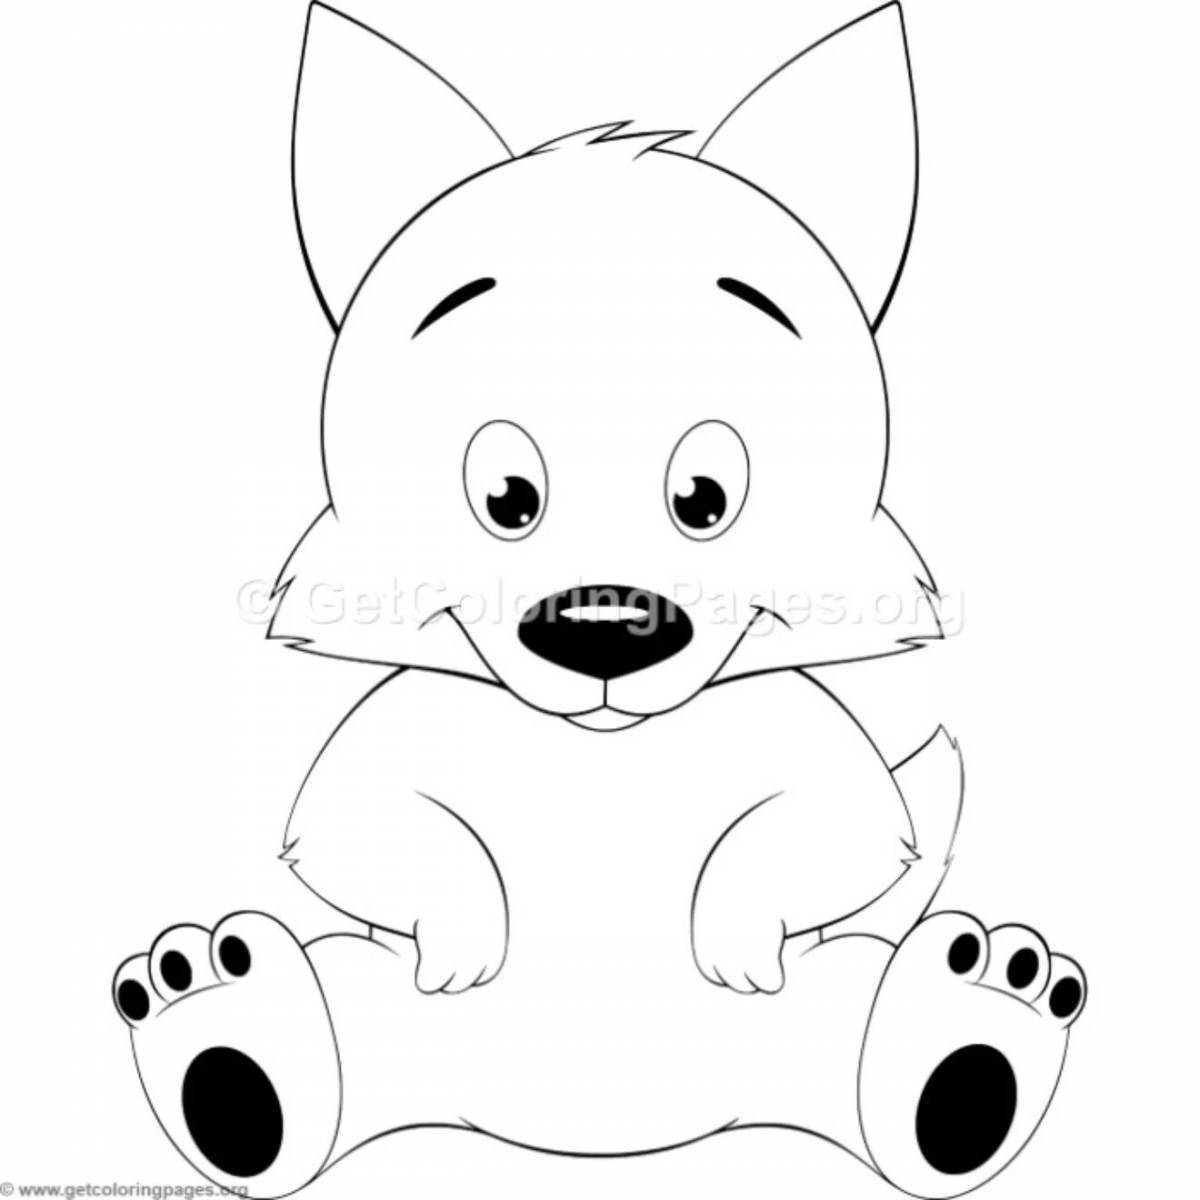 Coloring fairy wolf cub